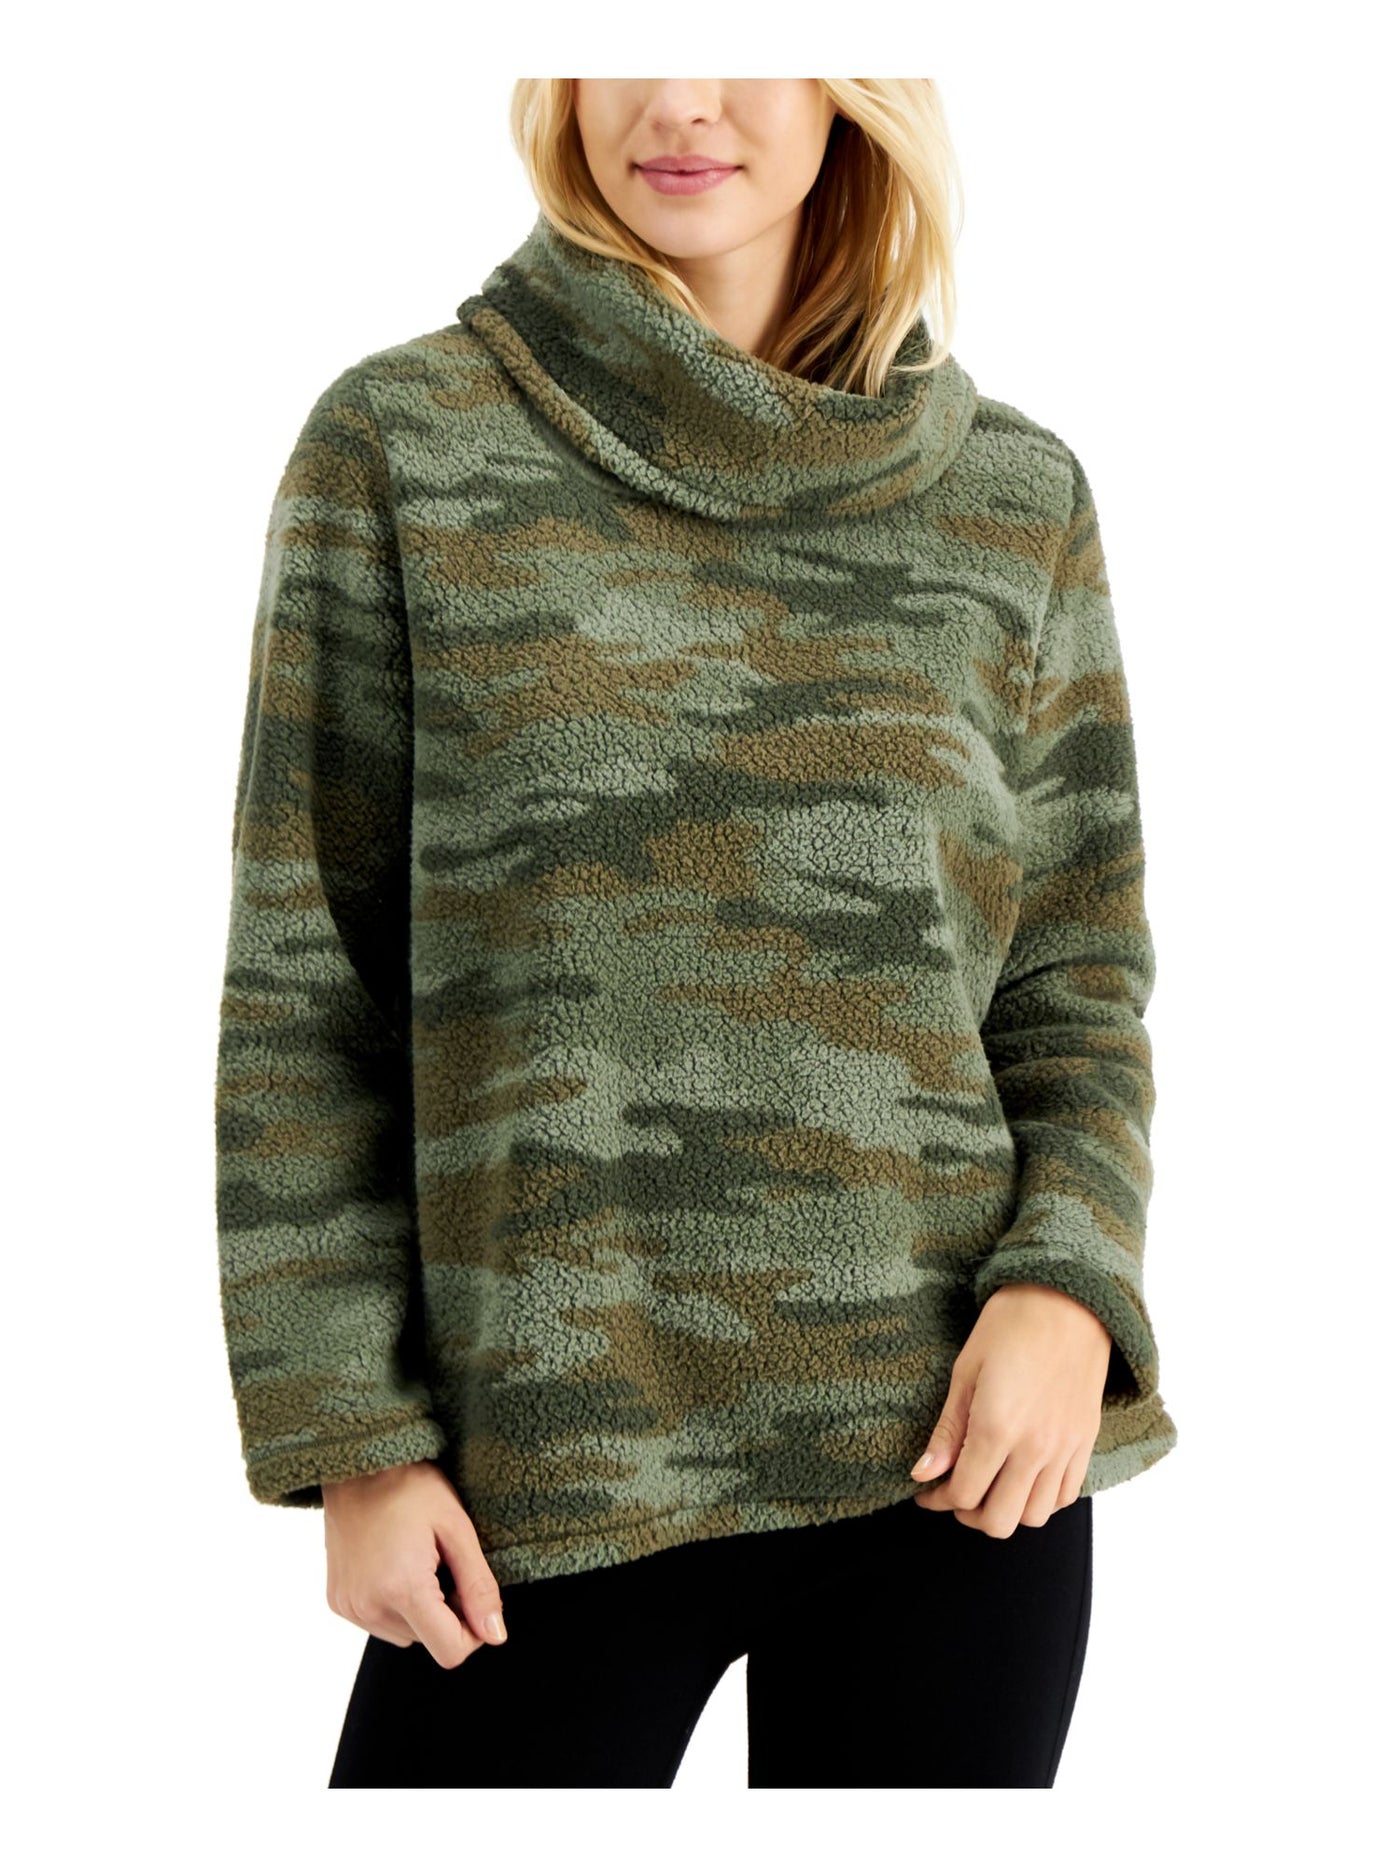 STYLE & COMPANY Womens Green Camouflage Long Sleeve Cowl Neck Sweater S